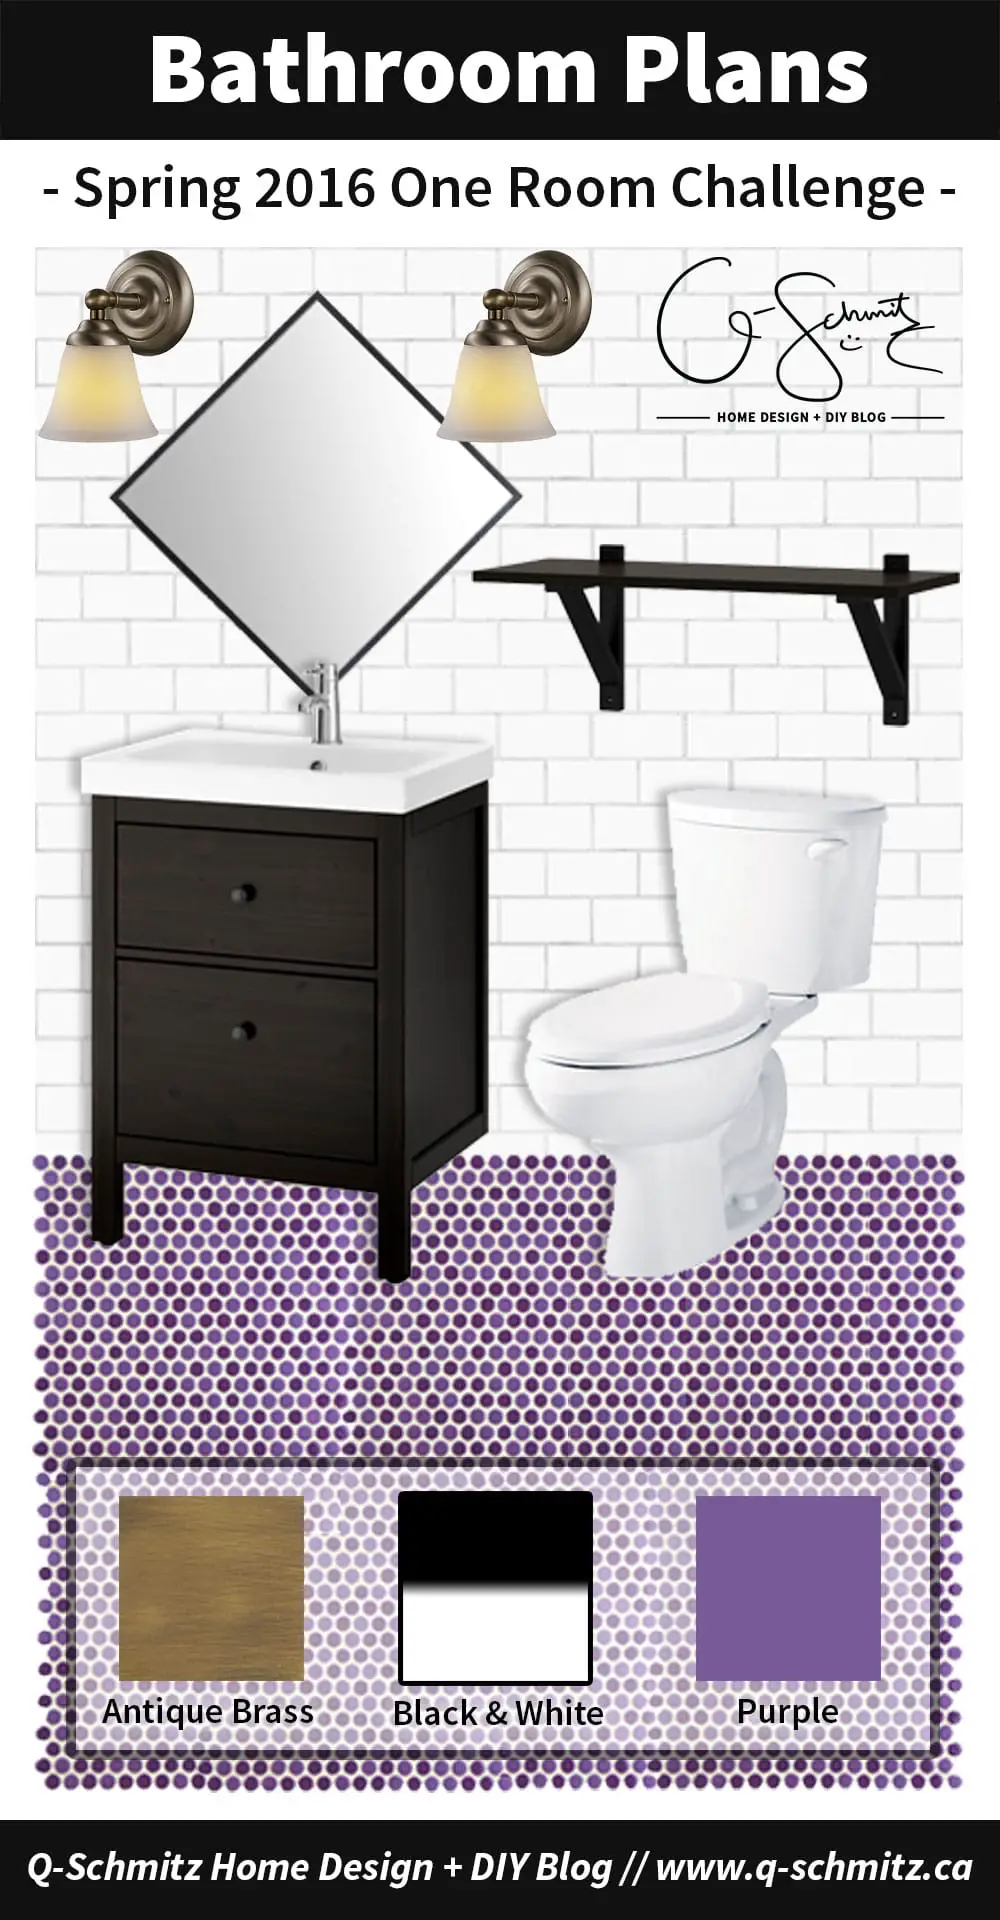 Our basement half bathroom plans involve black, white, purple and antique brass- and should be a great project for the 2016 Spring One Room Challenge (ORC)!